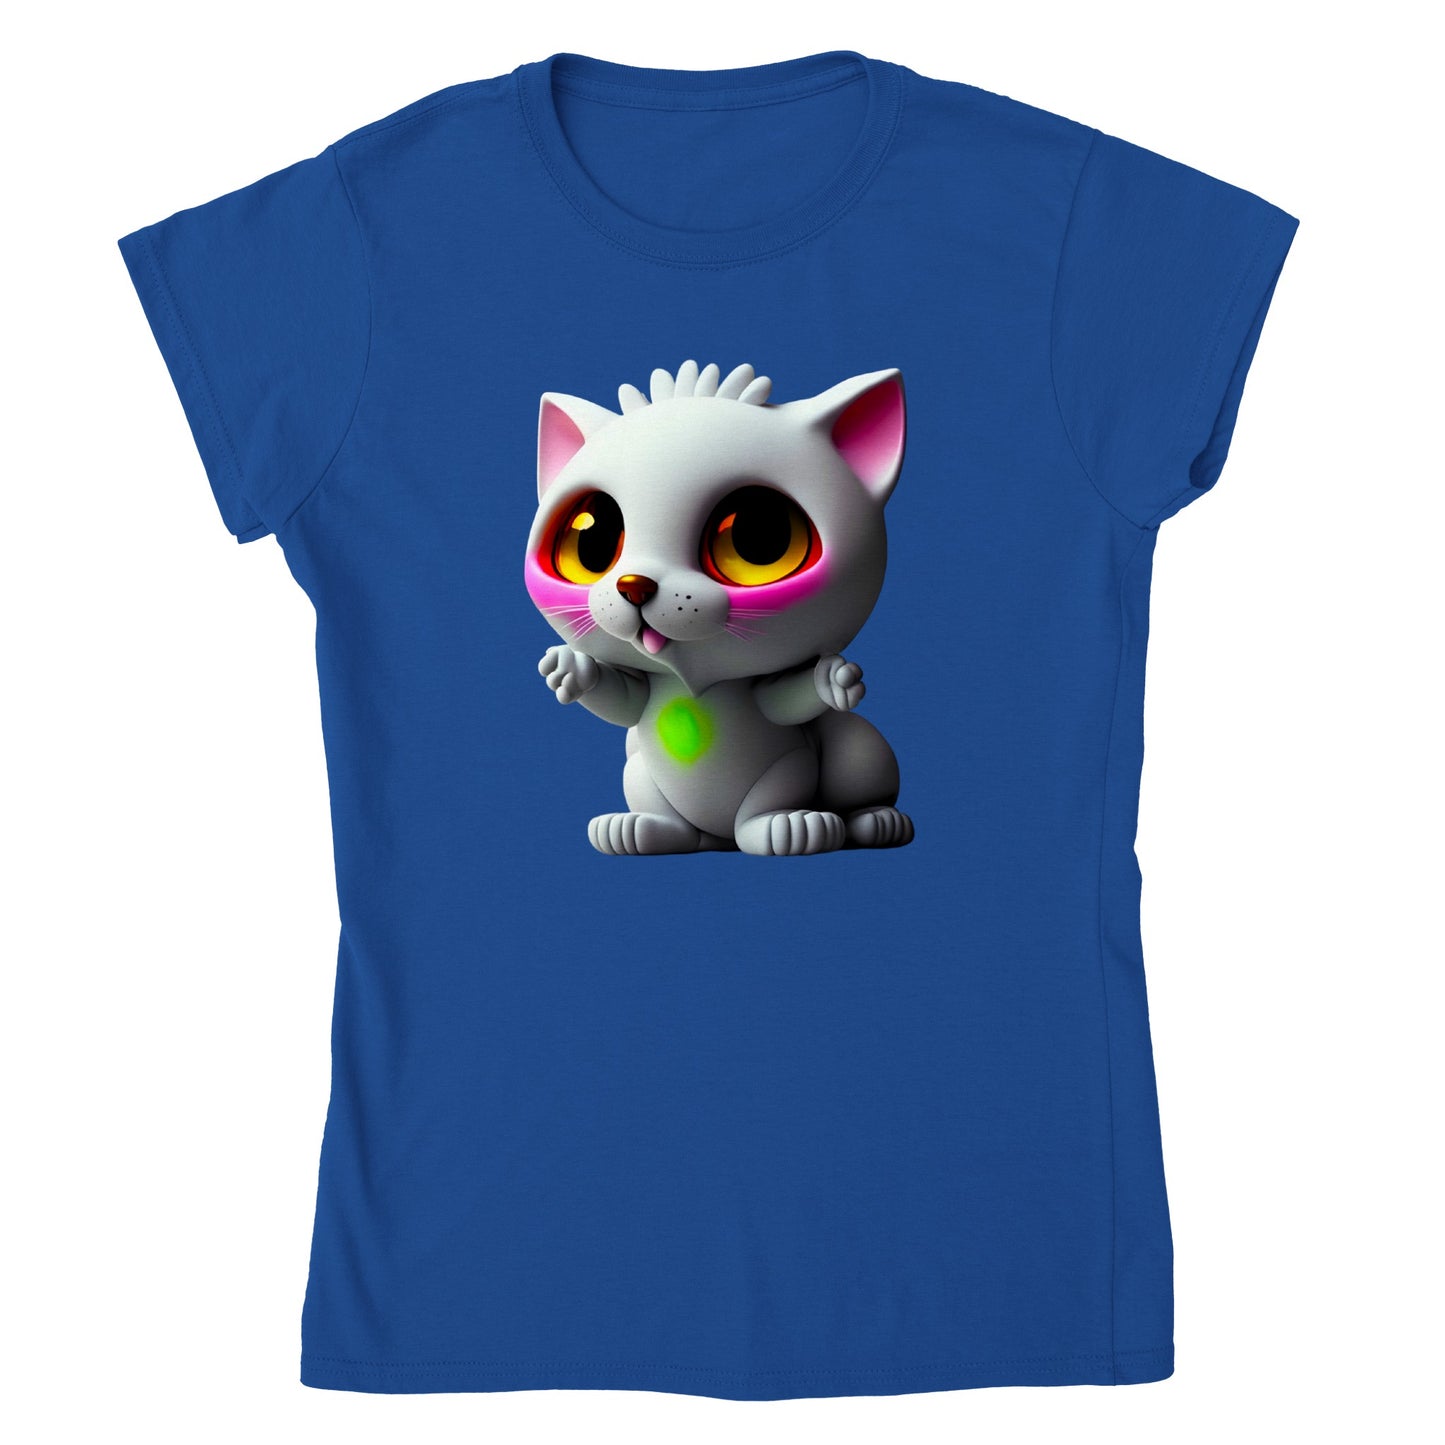 Adorable, Cool, Cute Cats and Kittens Toy - Classic Women’s Crewneck T-Shirt 60